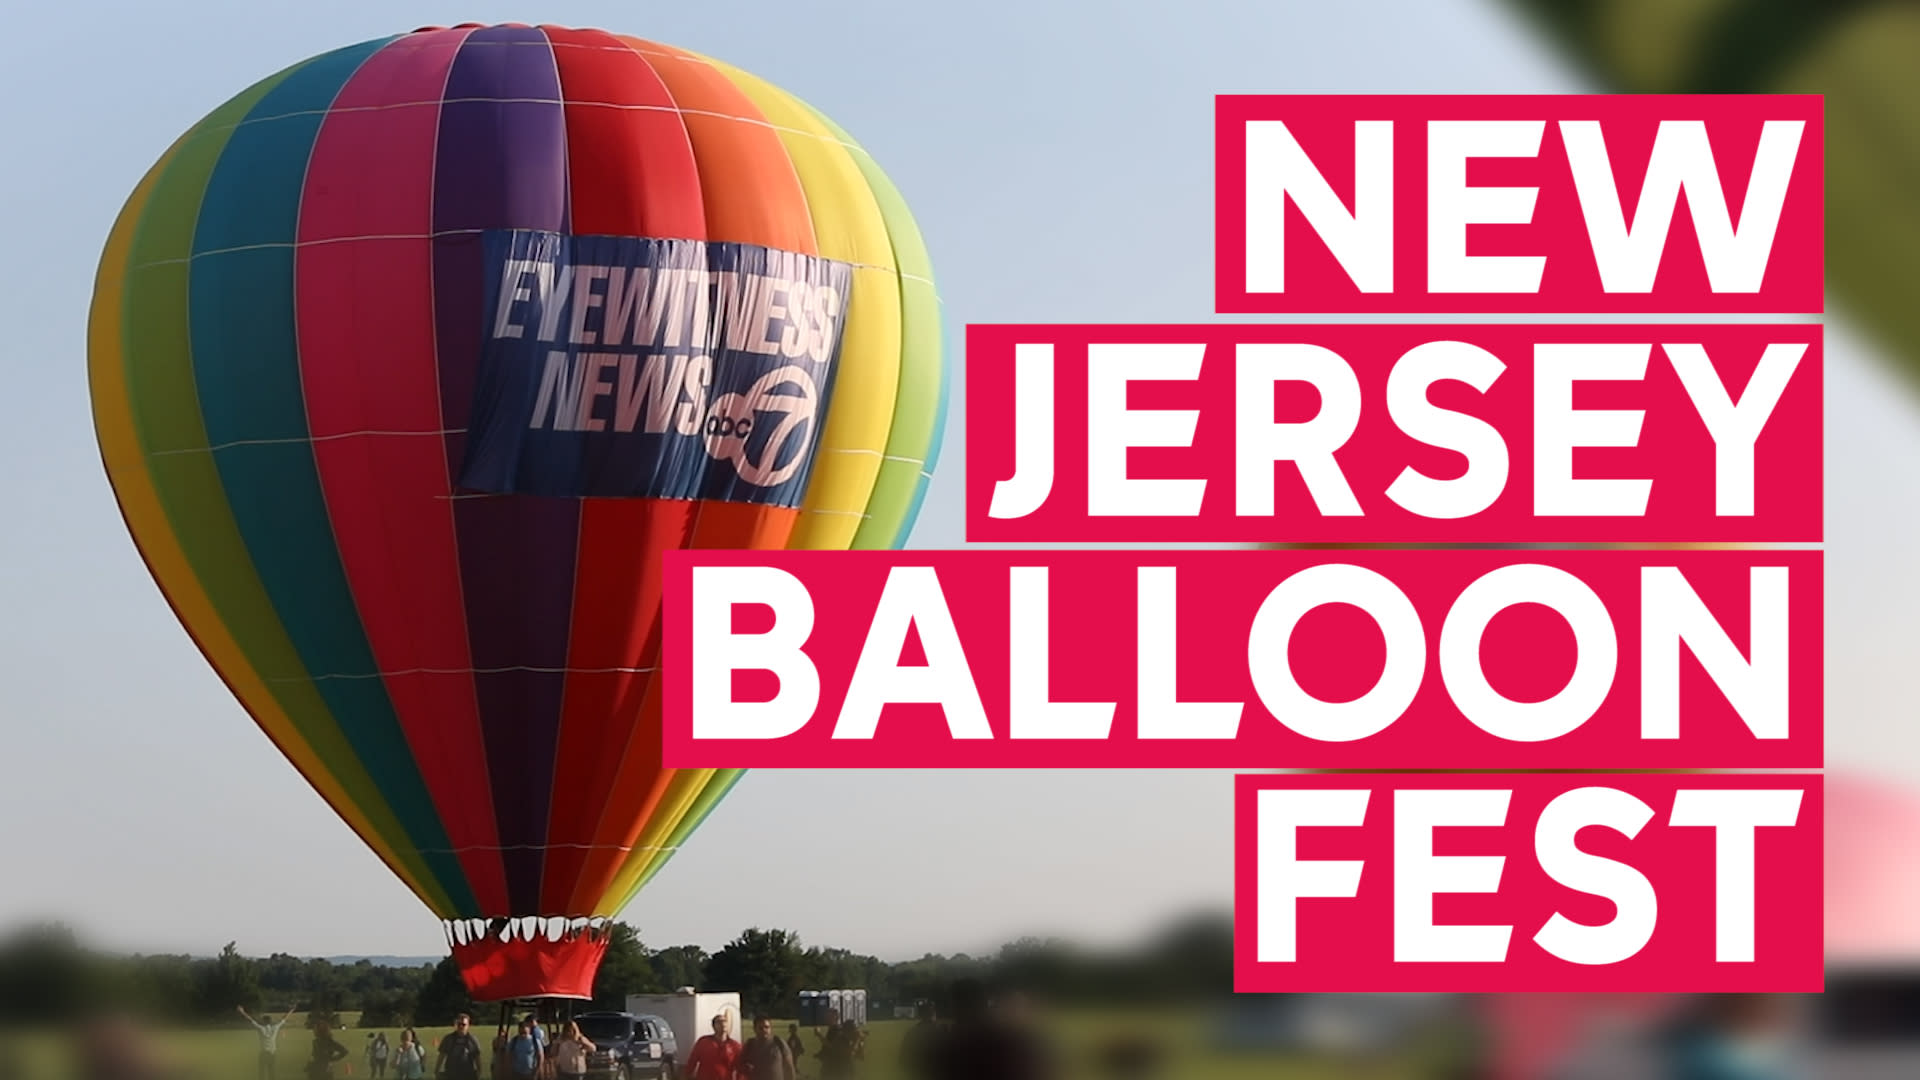 NJ Festival of Ballooning is the largest summertime hot air balloon